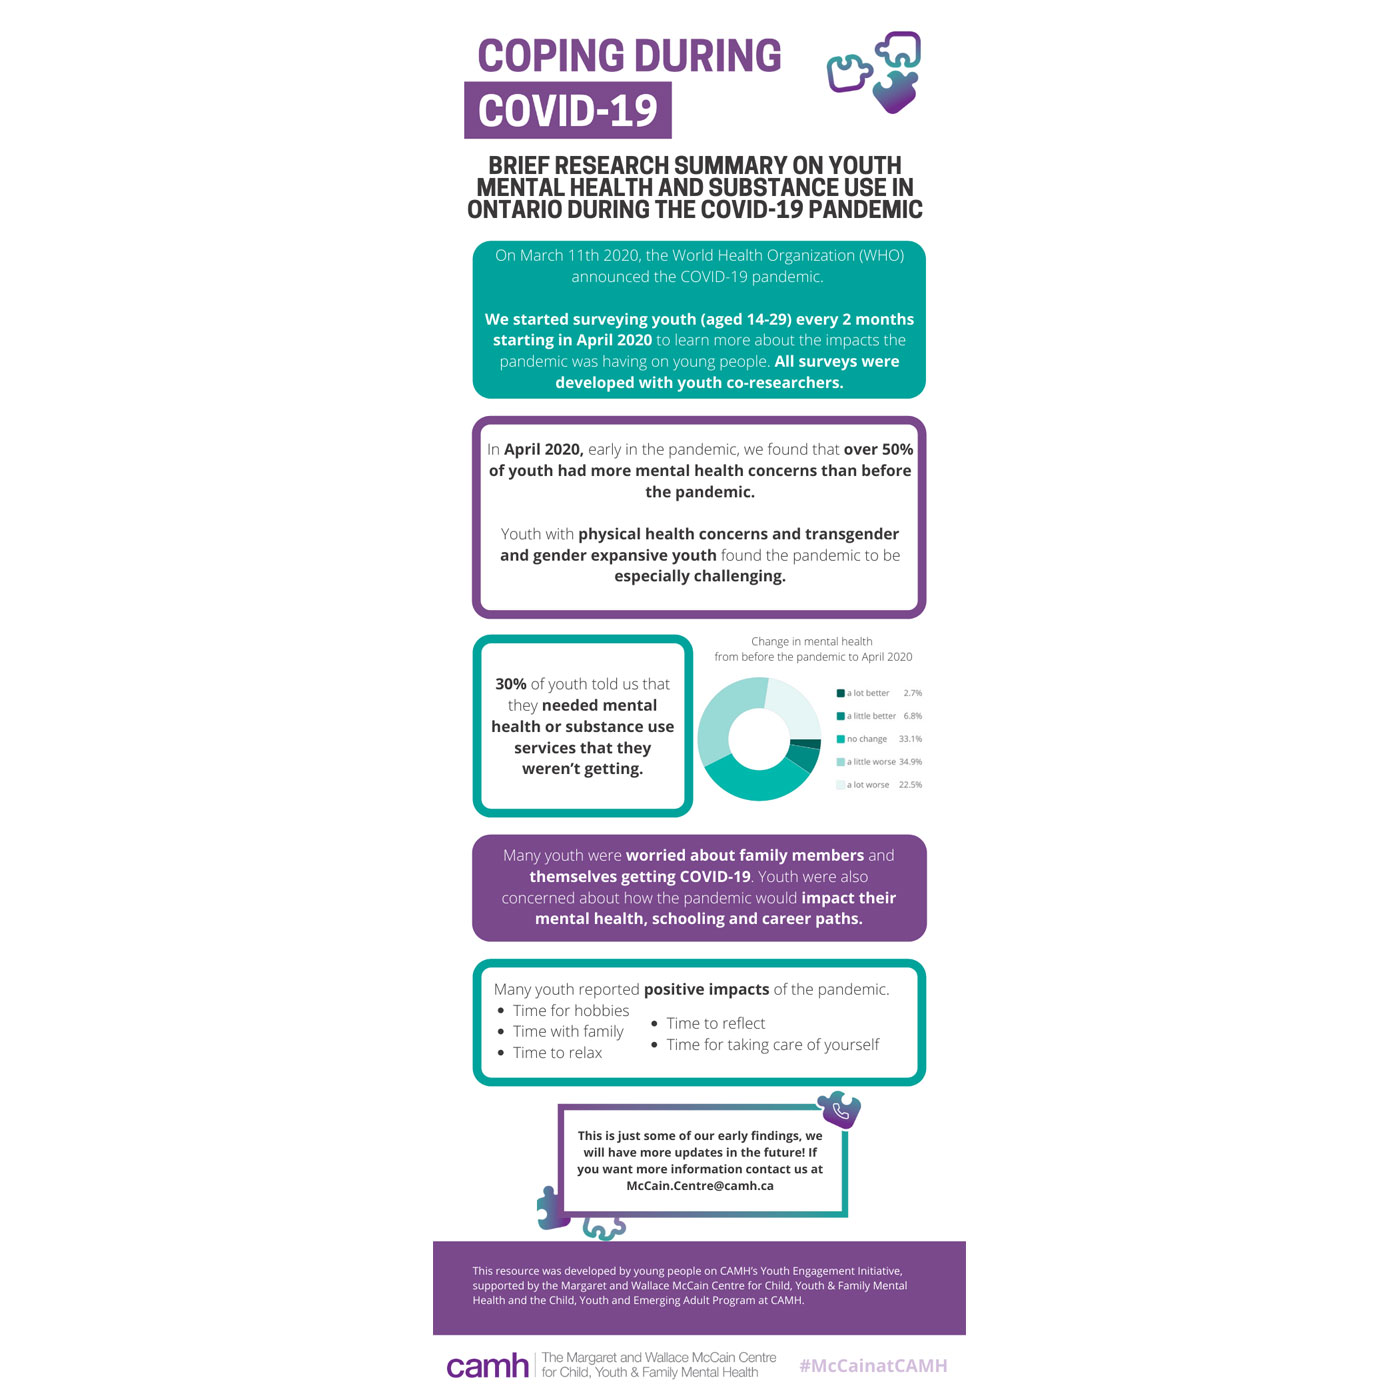 Coping during COVID-19 Infographic